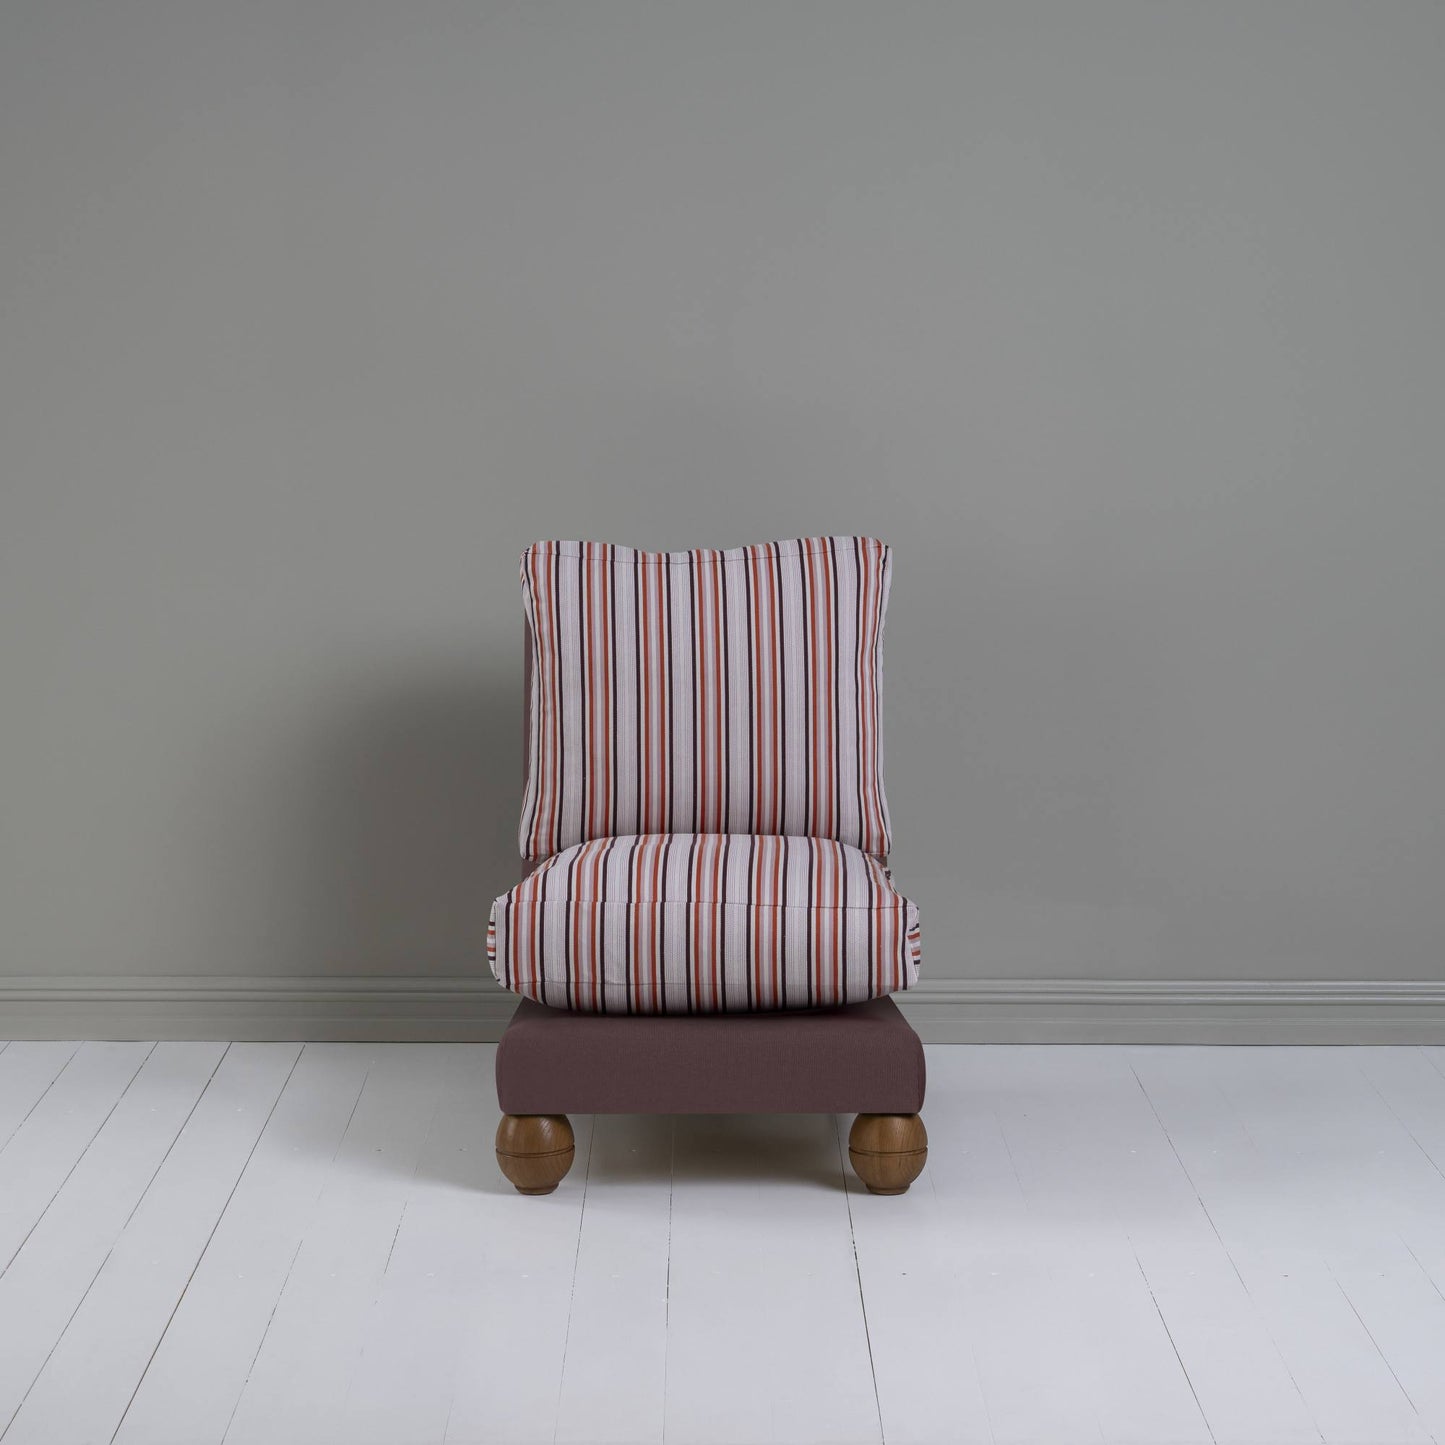 Perch Slipper Armchair in Laidback Linen Damson Frame, with Slow Lane Berry Seat